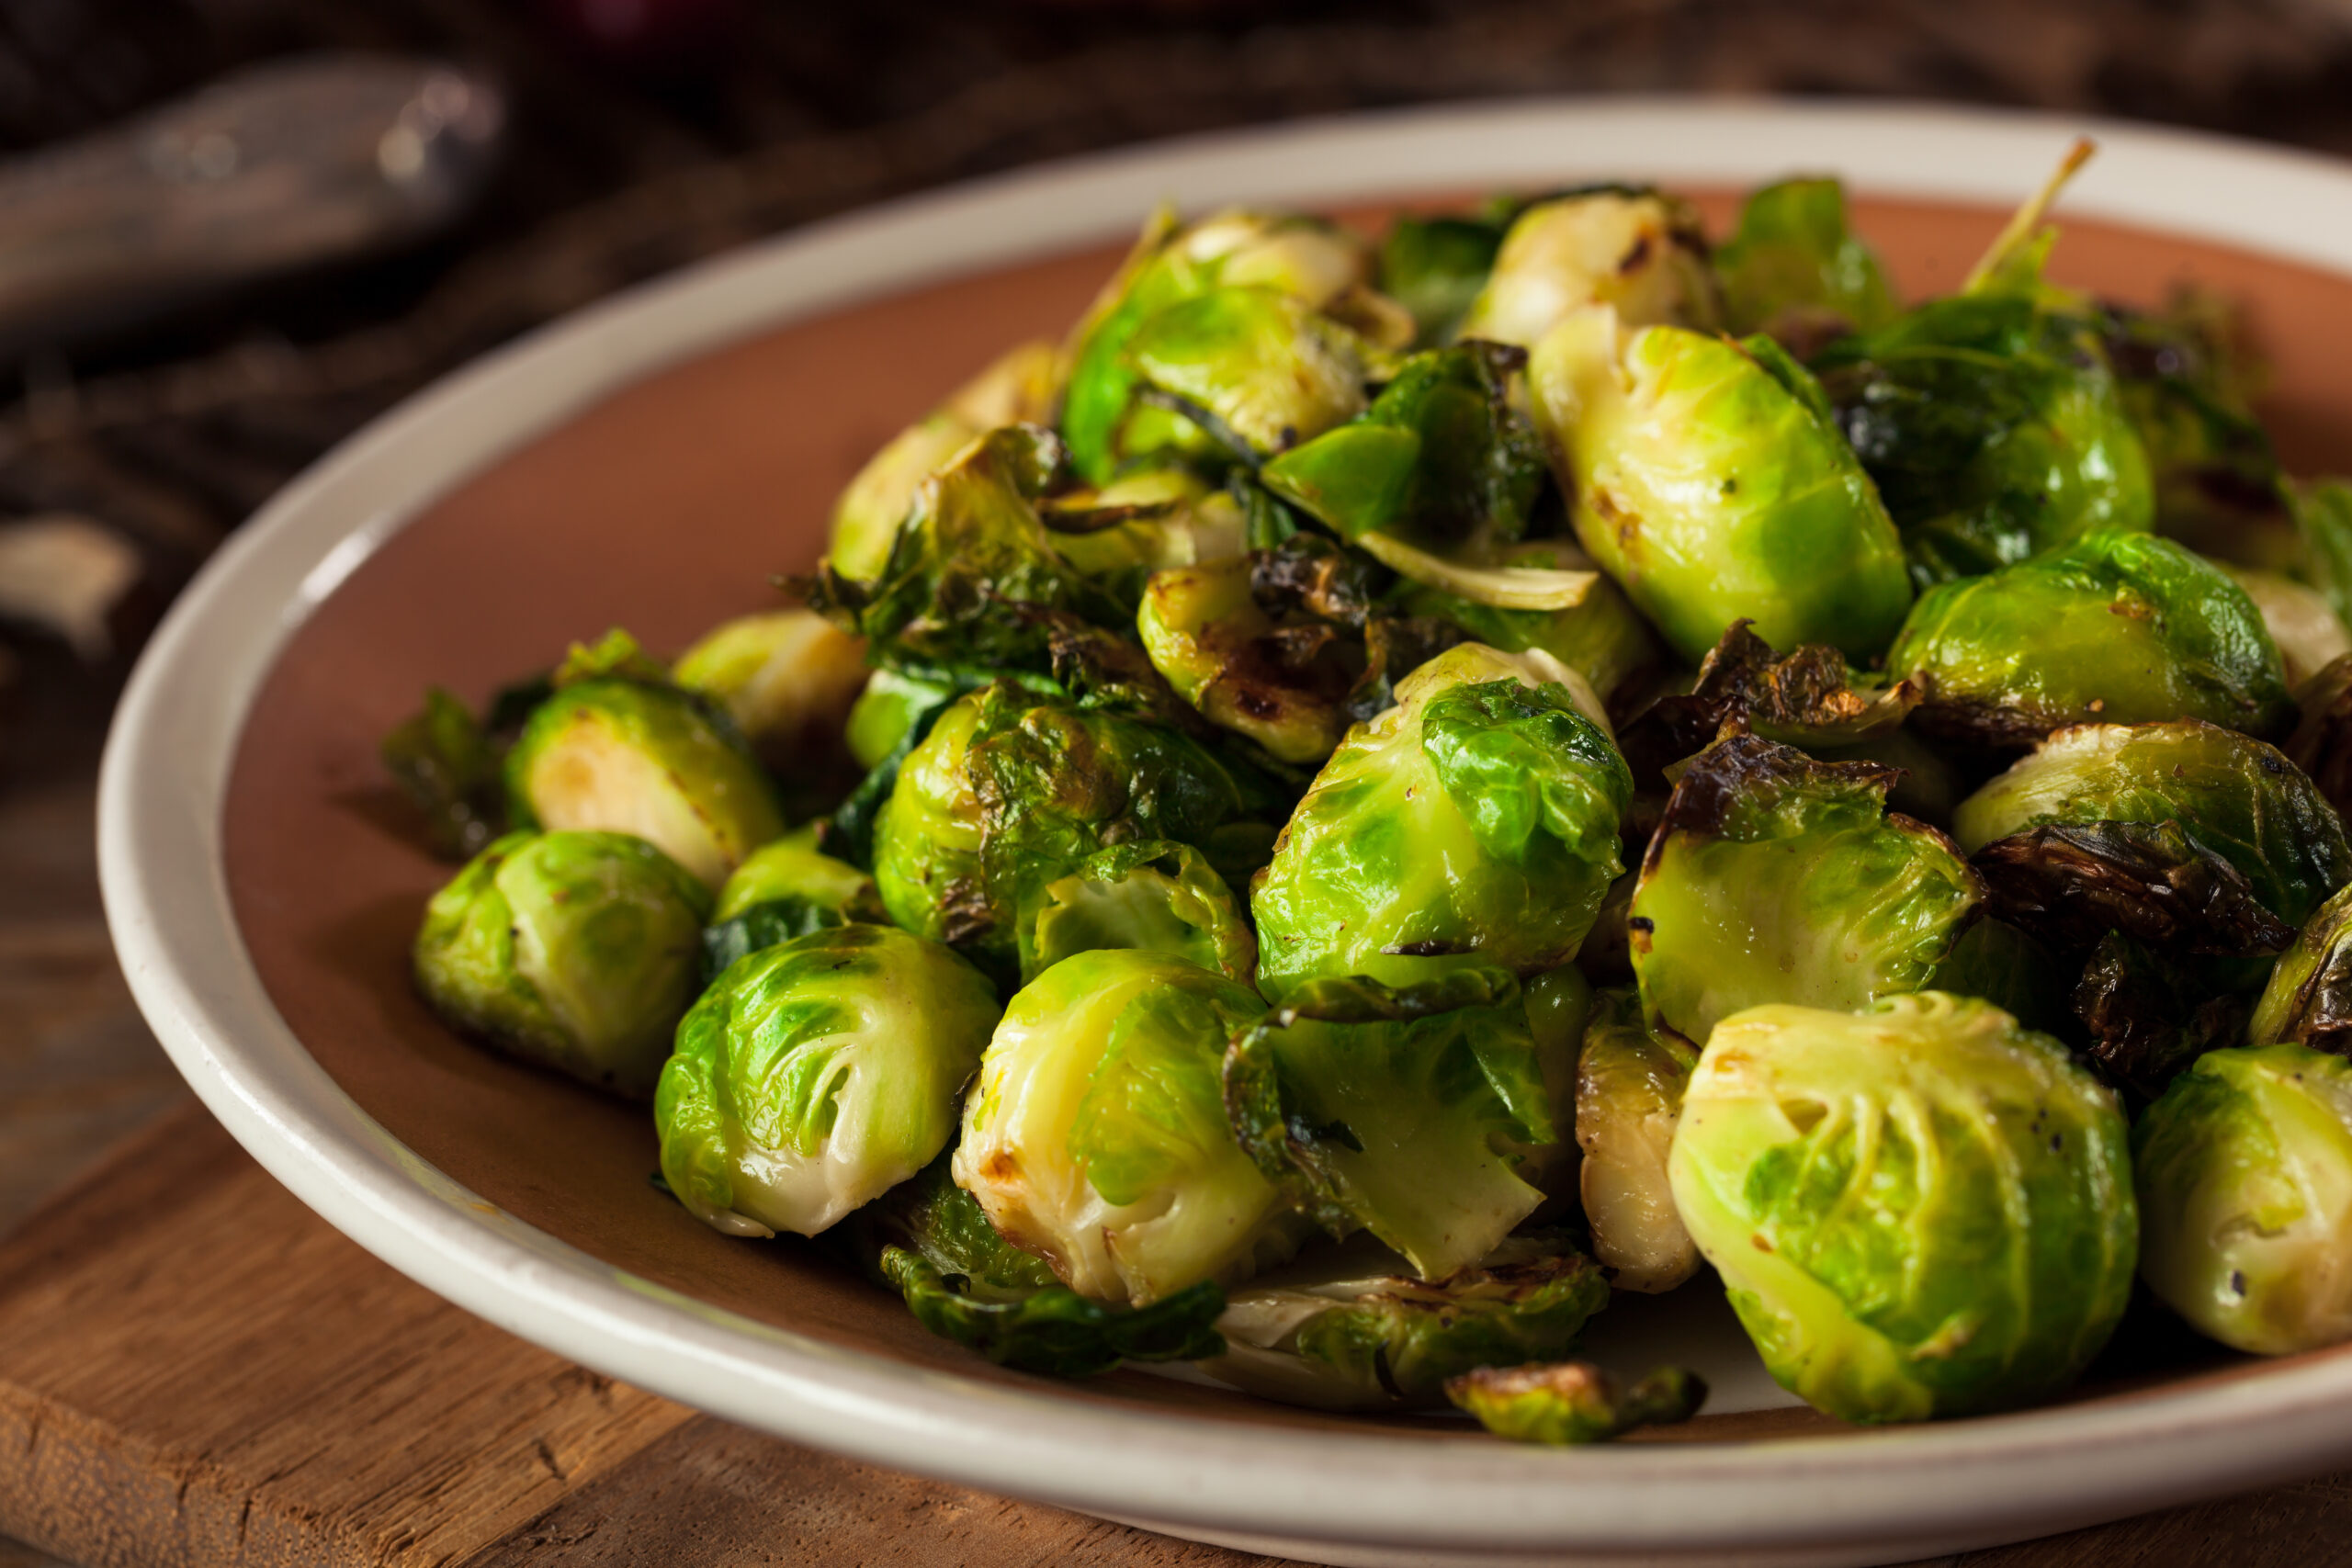 Homemade,Roasted,Brussel,Sprouts,With,Salt,And,Pepper